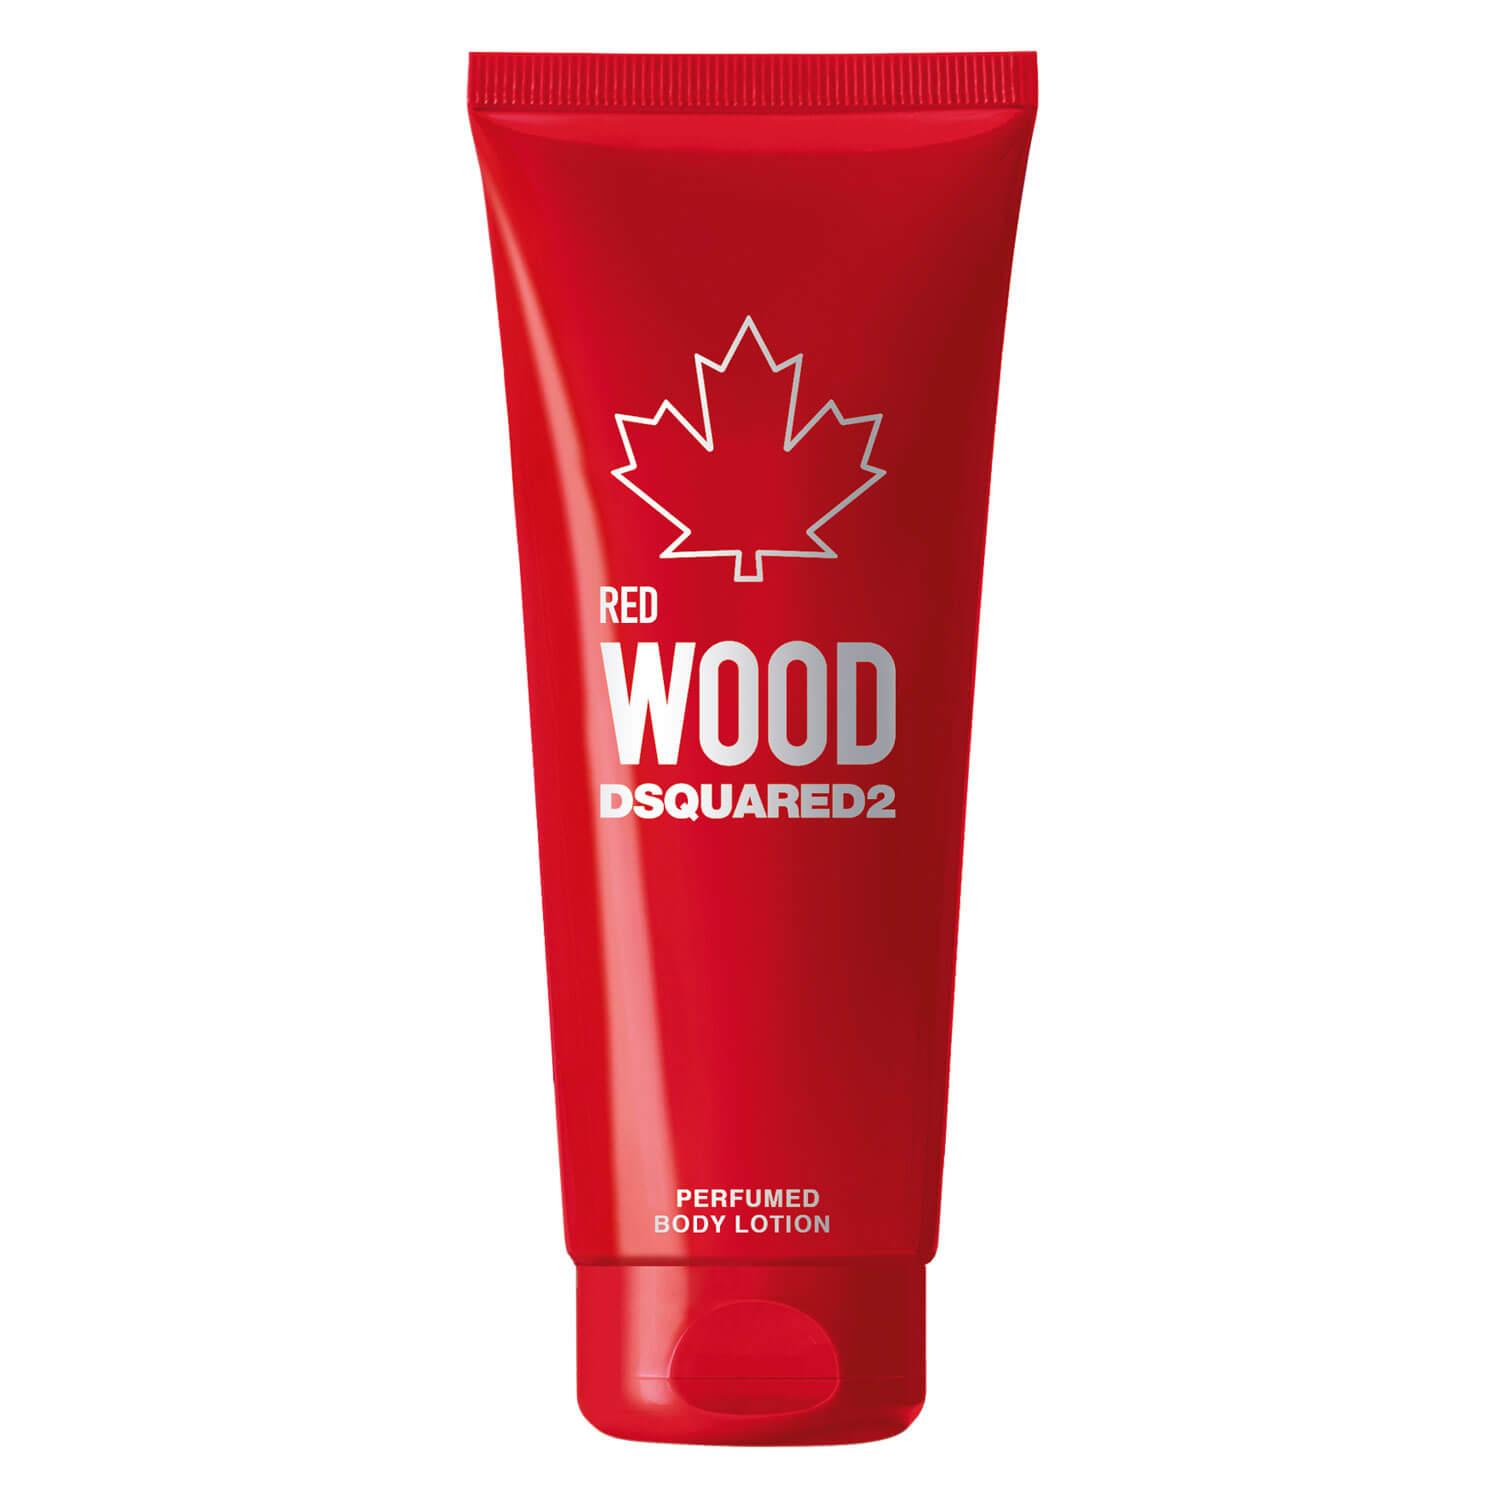 DSQUARED2 WOOD - Red Pour Femme Body Lotion